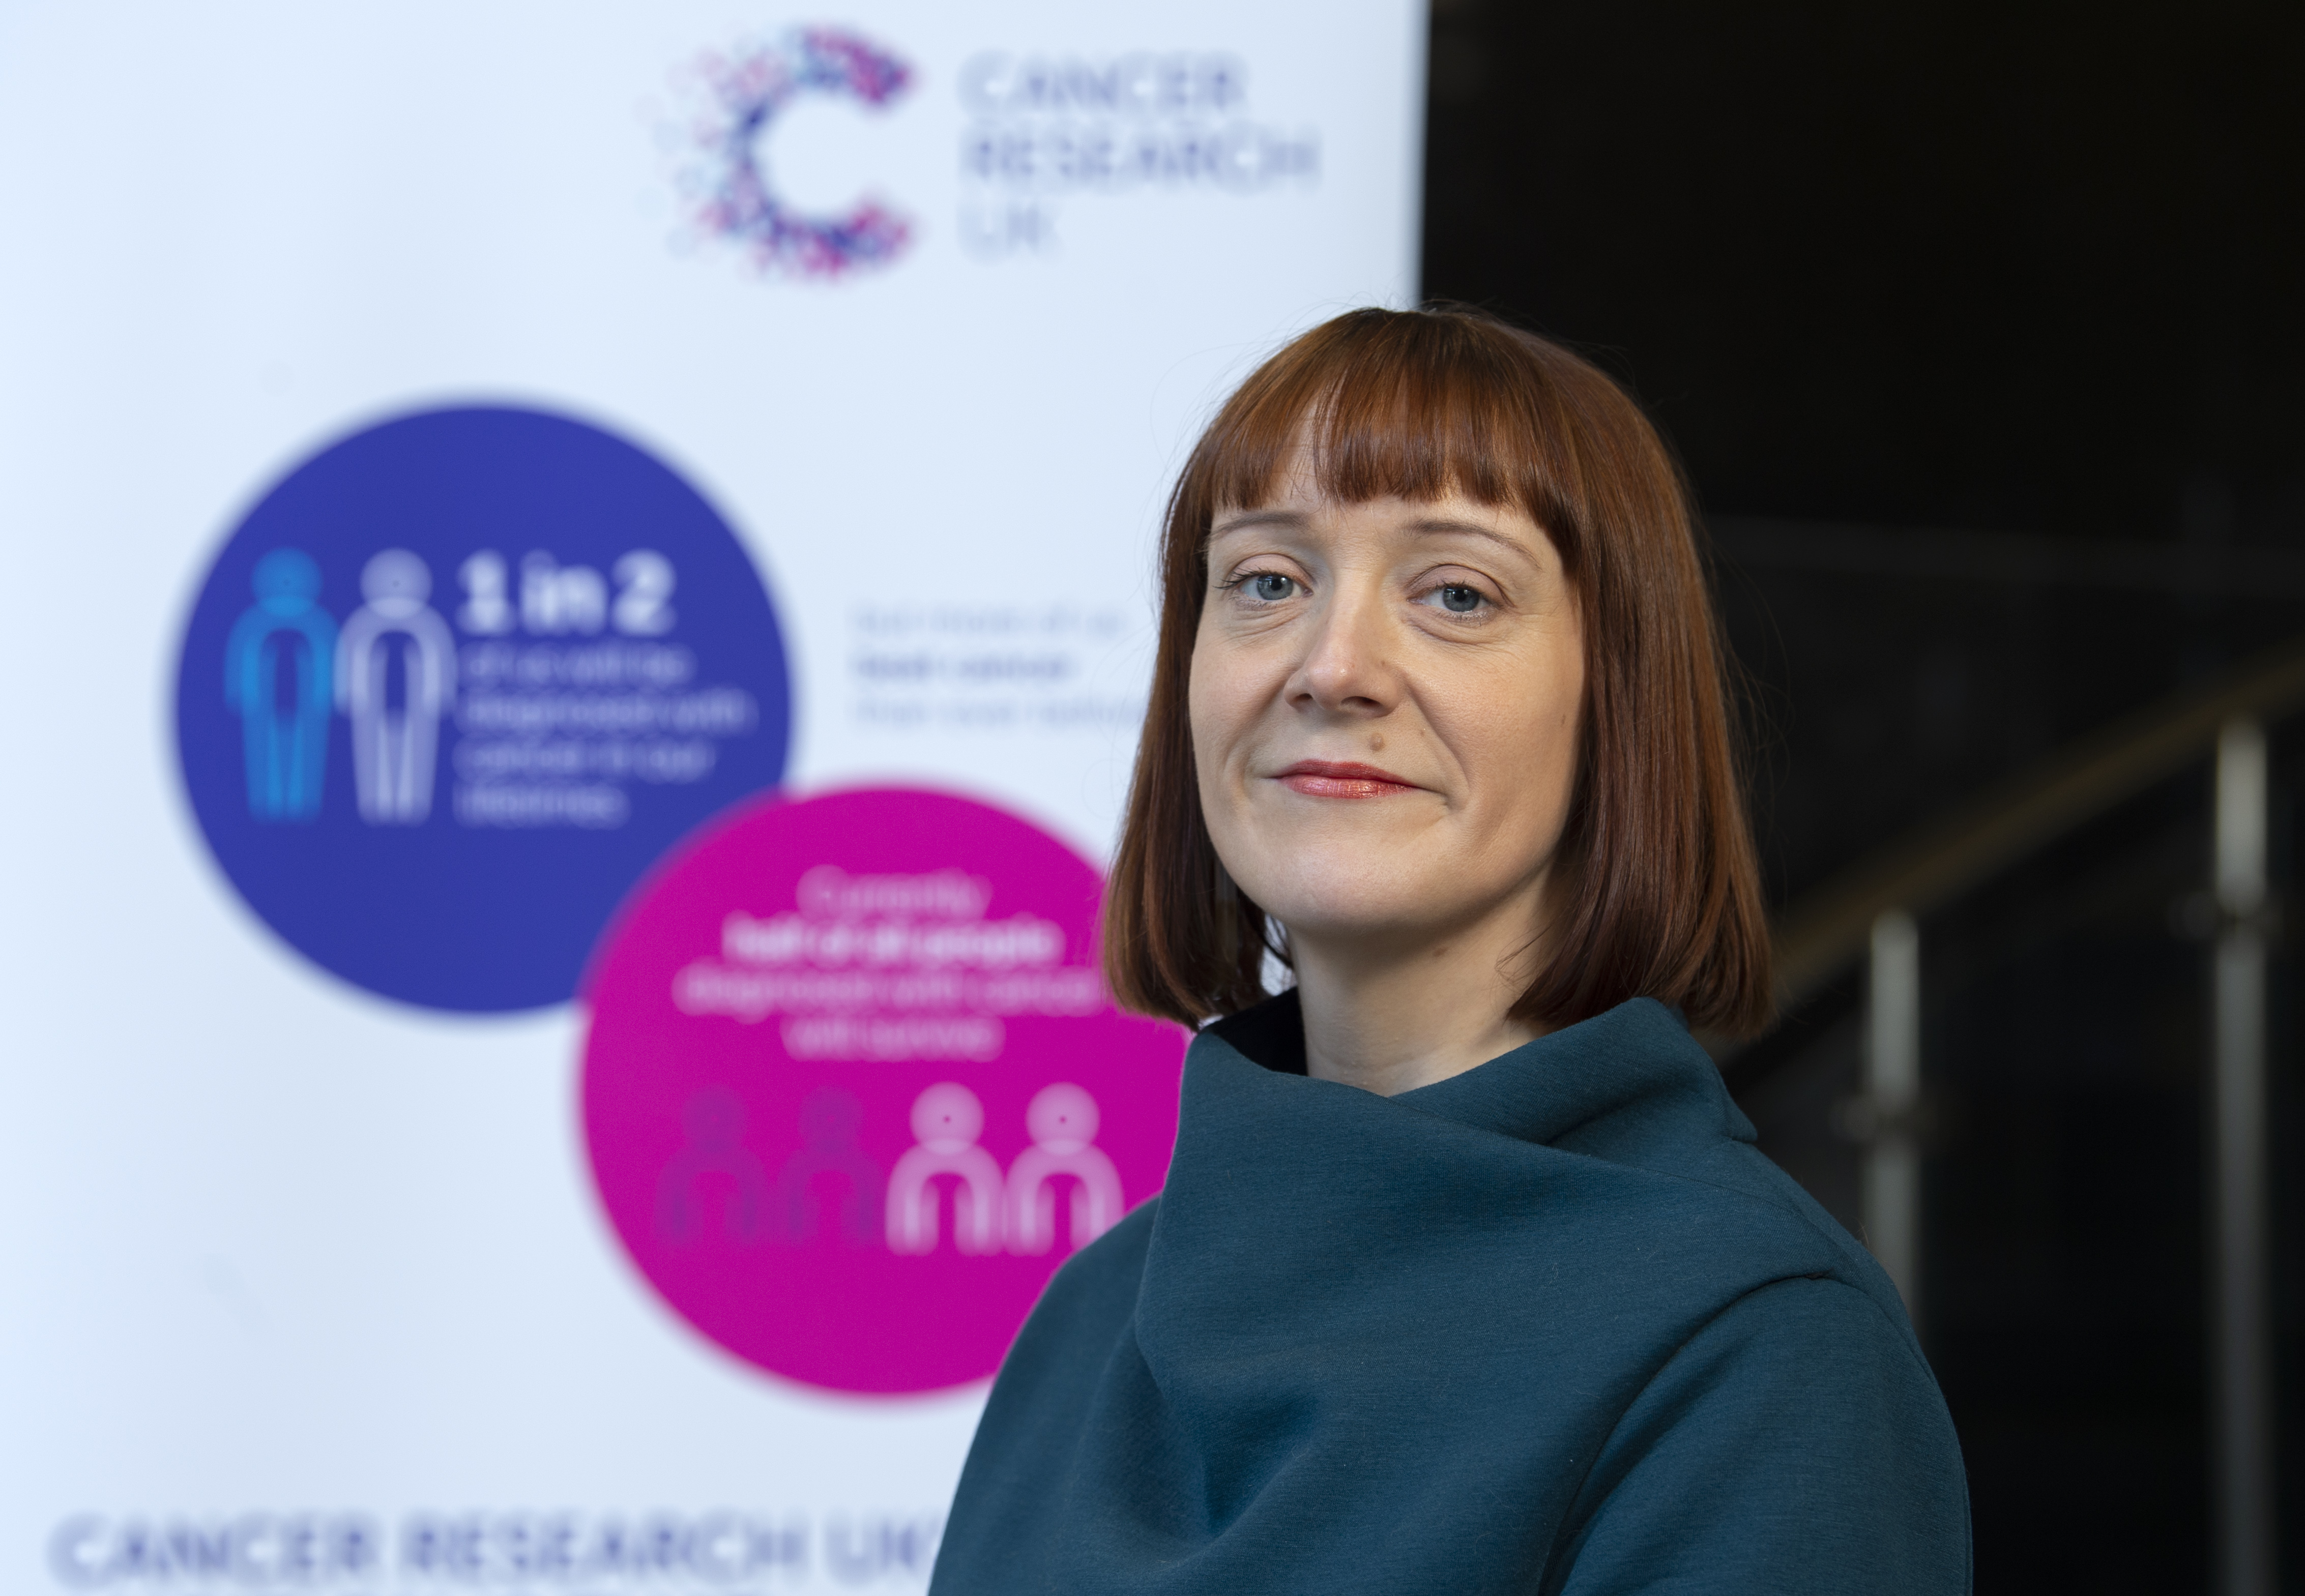 LM_CRUK - Marion O'Neill - 003